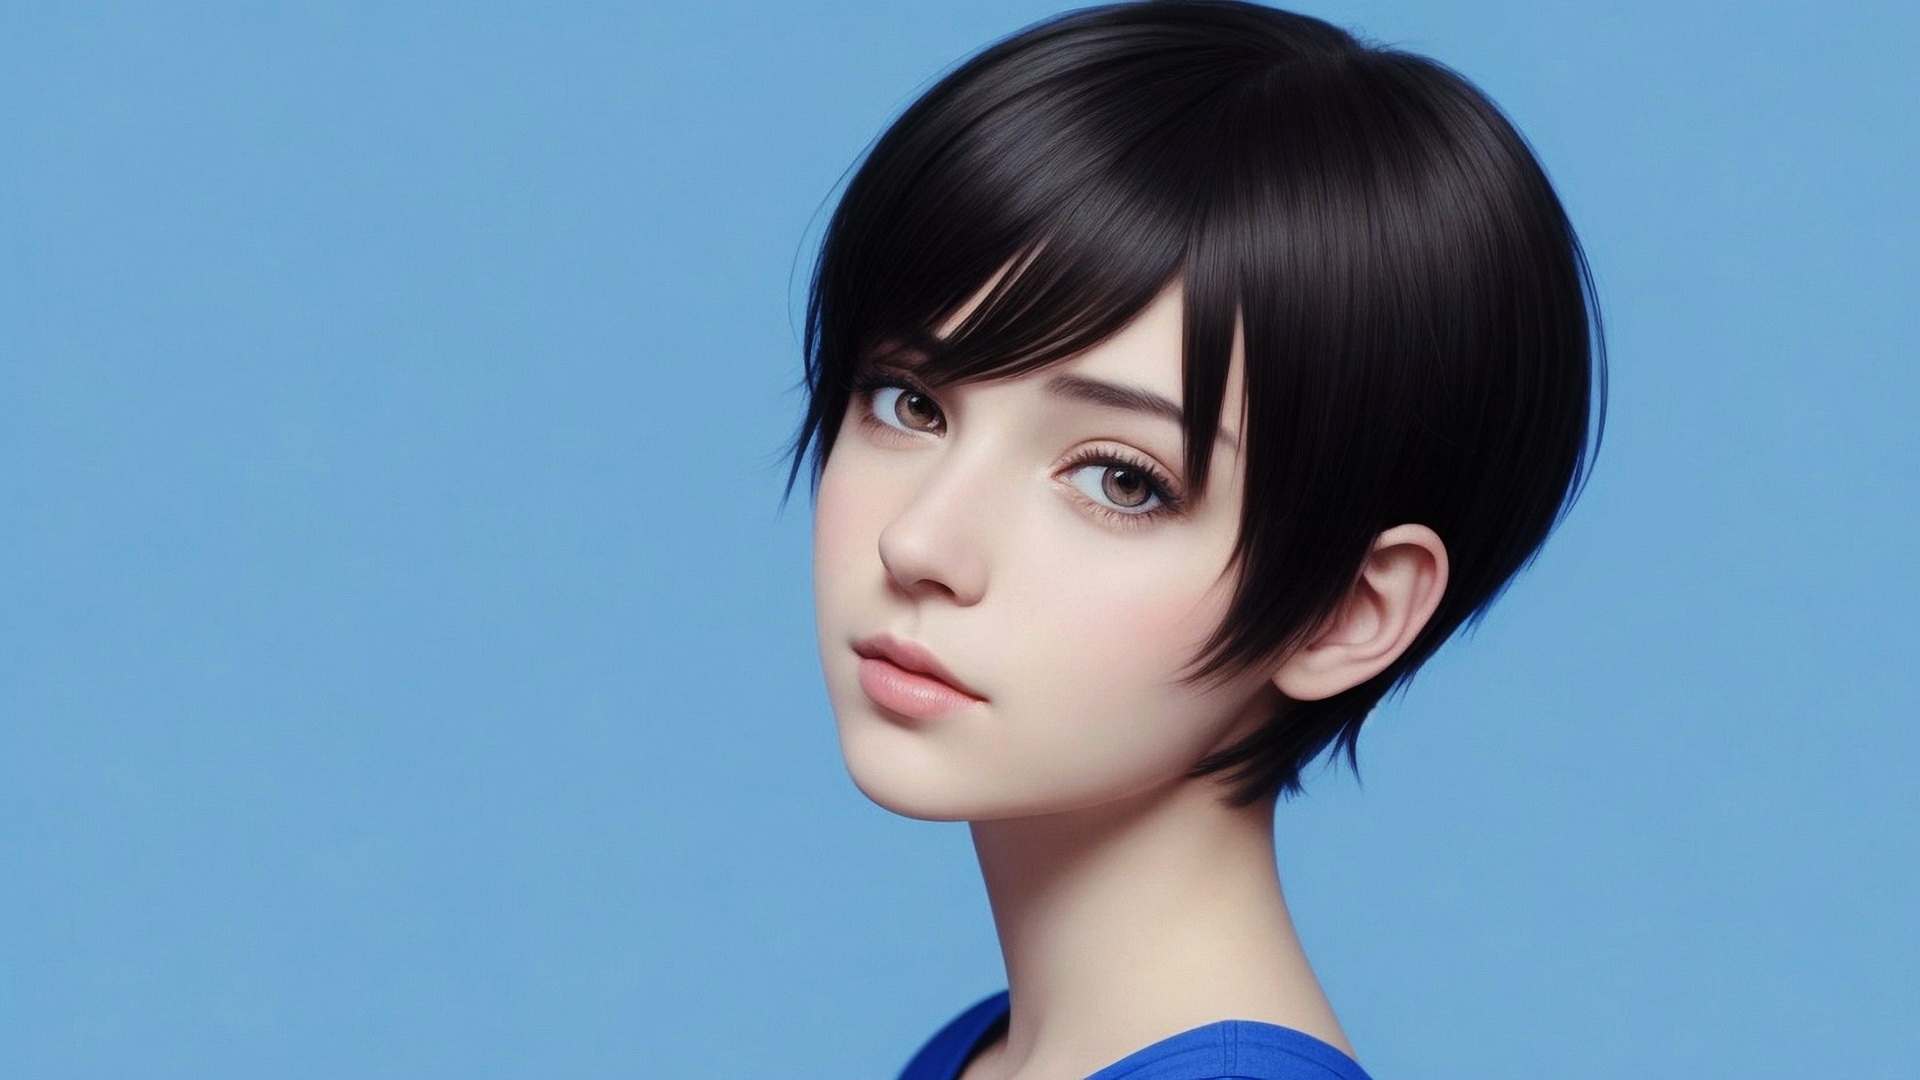 Free photo Portrait of a girl with short hair on a blue background